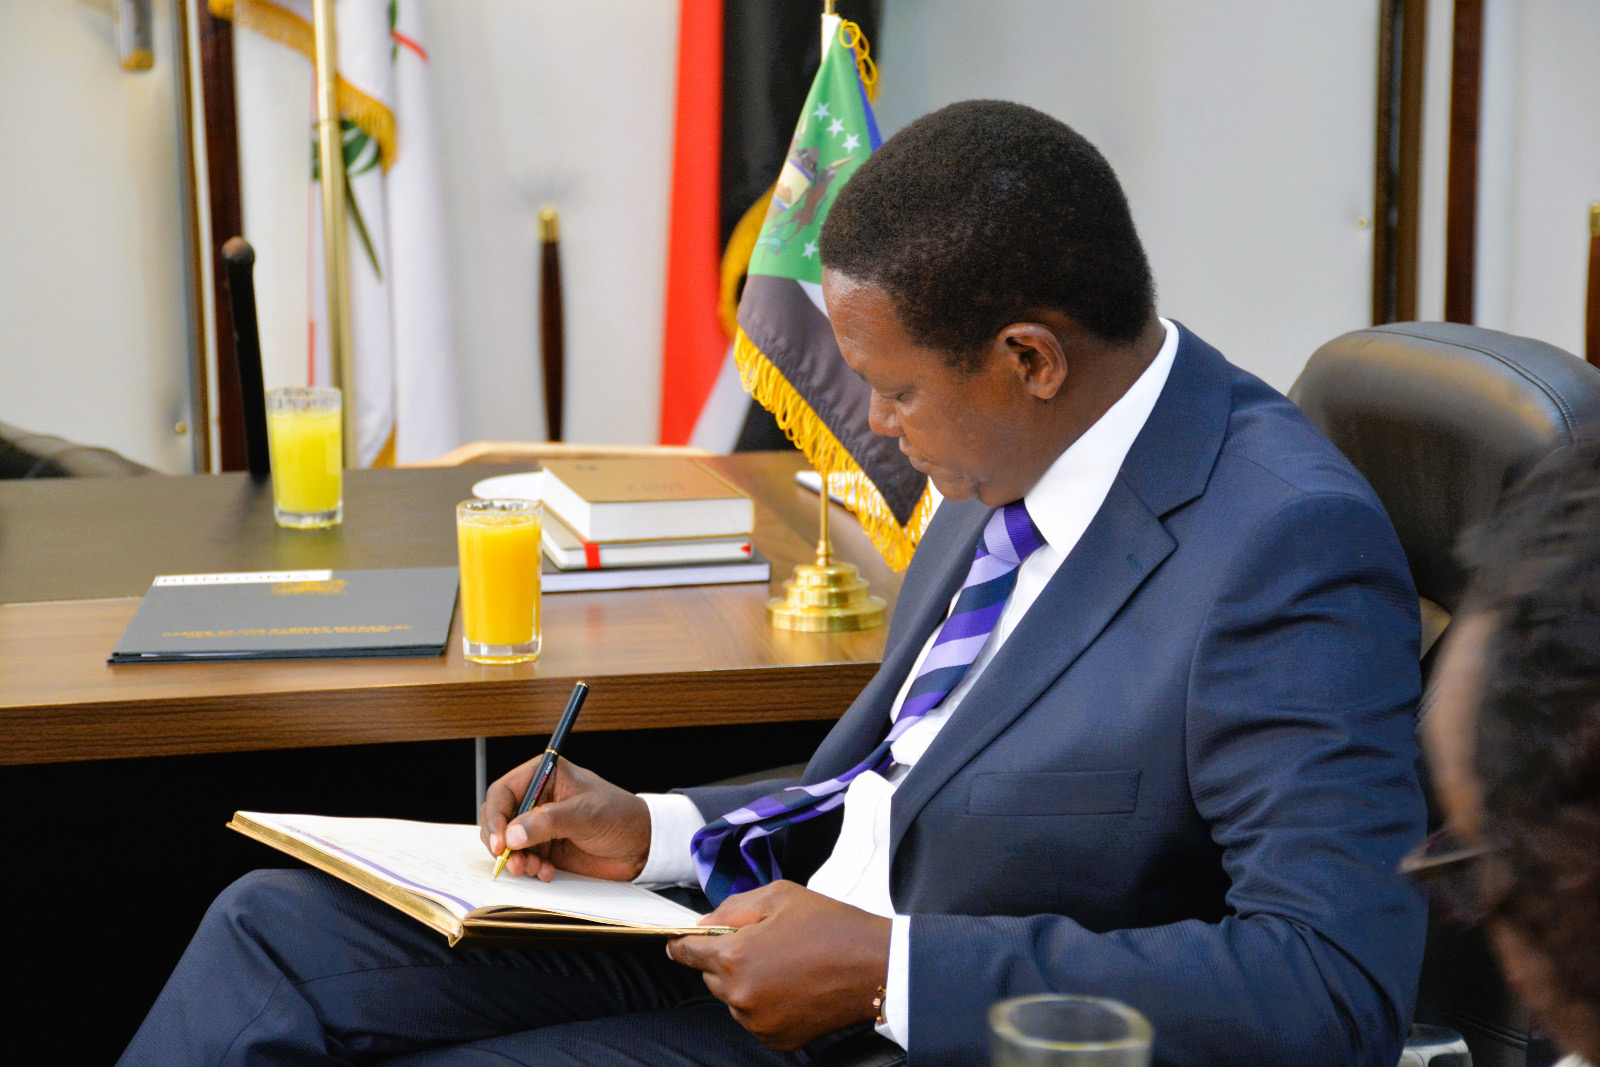 The Cabinet Secretary, Ministry of Tourism and Wildlife, Dr. Alfred Mutua, signing the Governor's visitors book.